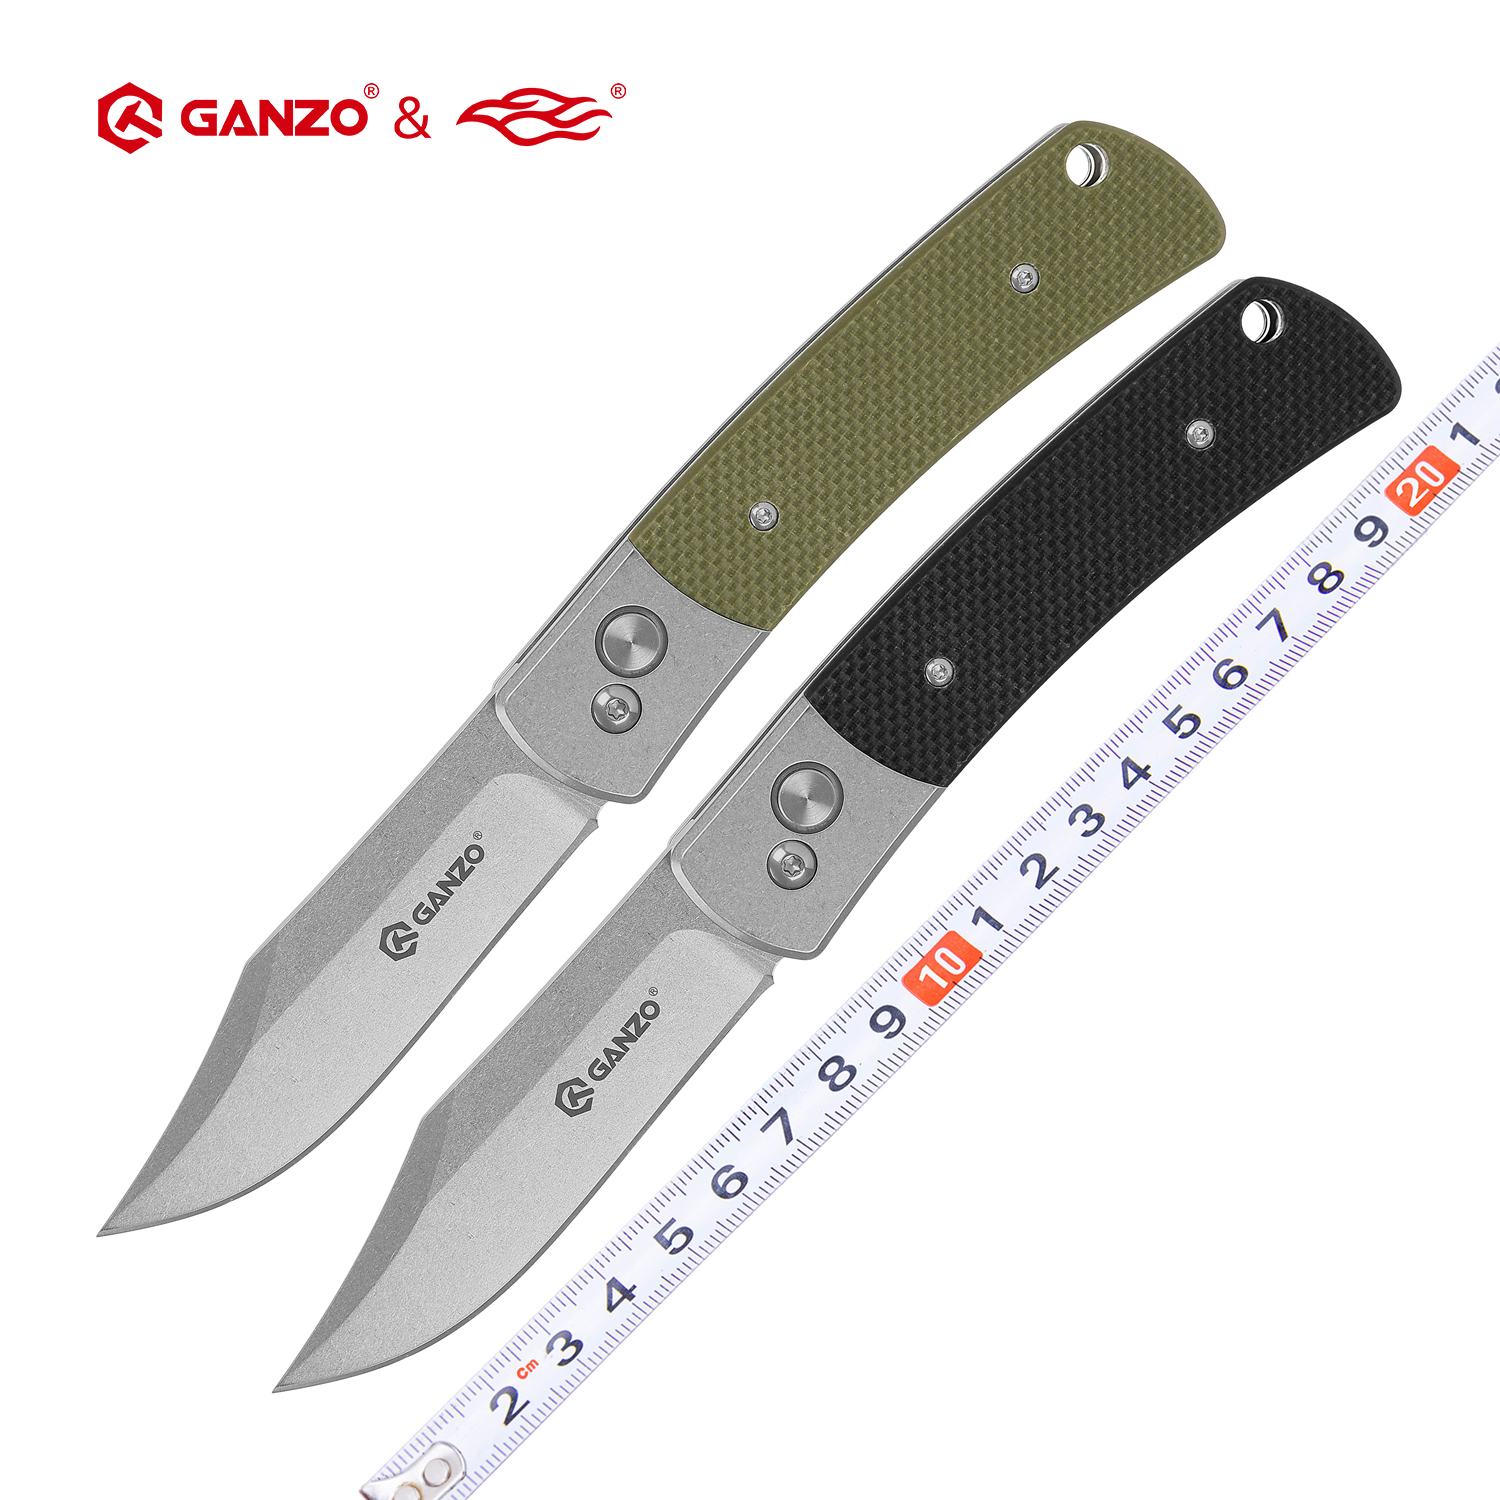 

58-60HRC Ganzo G7472 440C G10 or Wood Hande Foding knife Surviva Camping too Hunting Pocket Knife tactica edc outdoor too